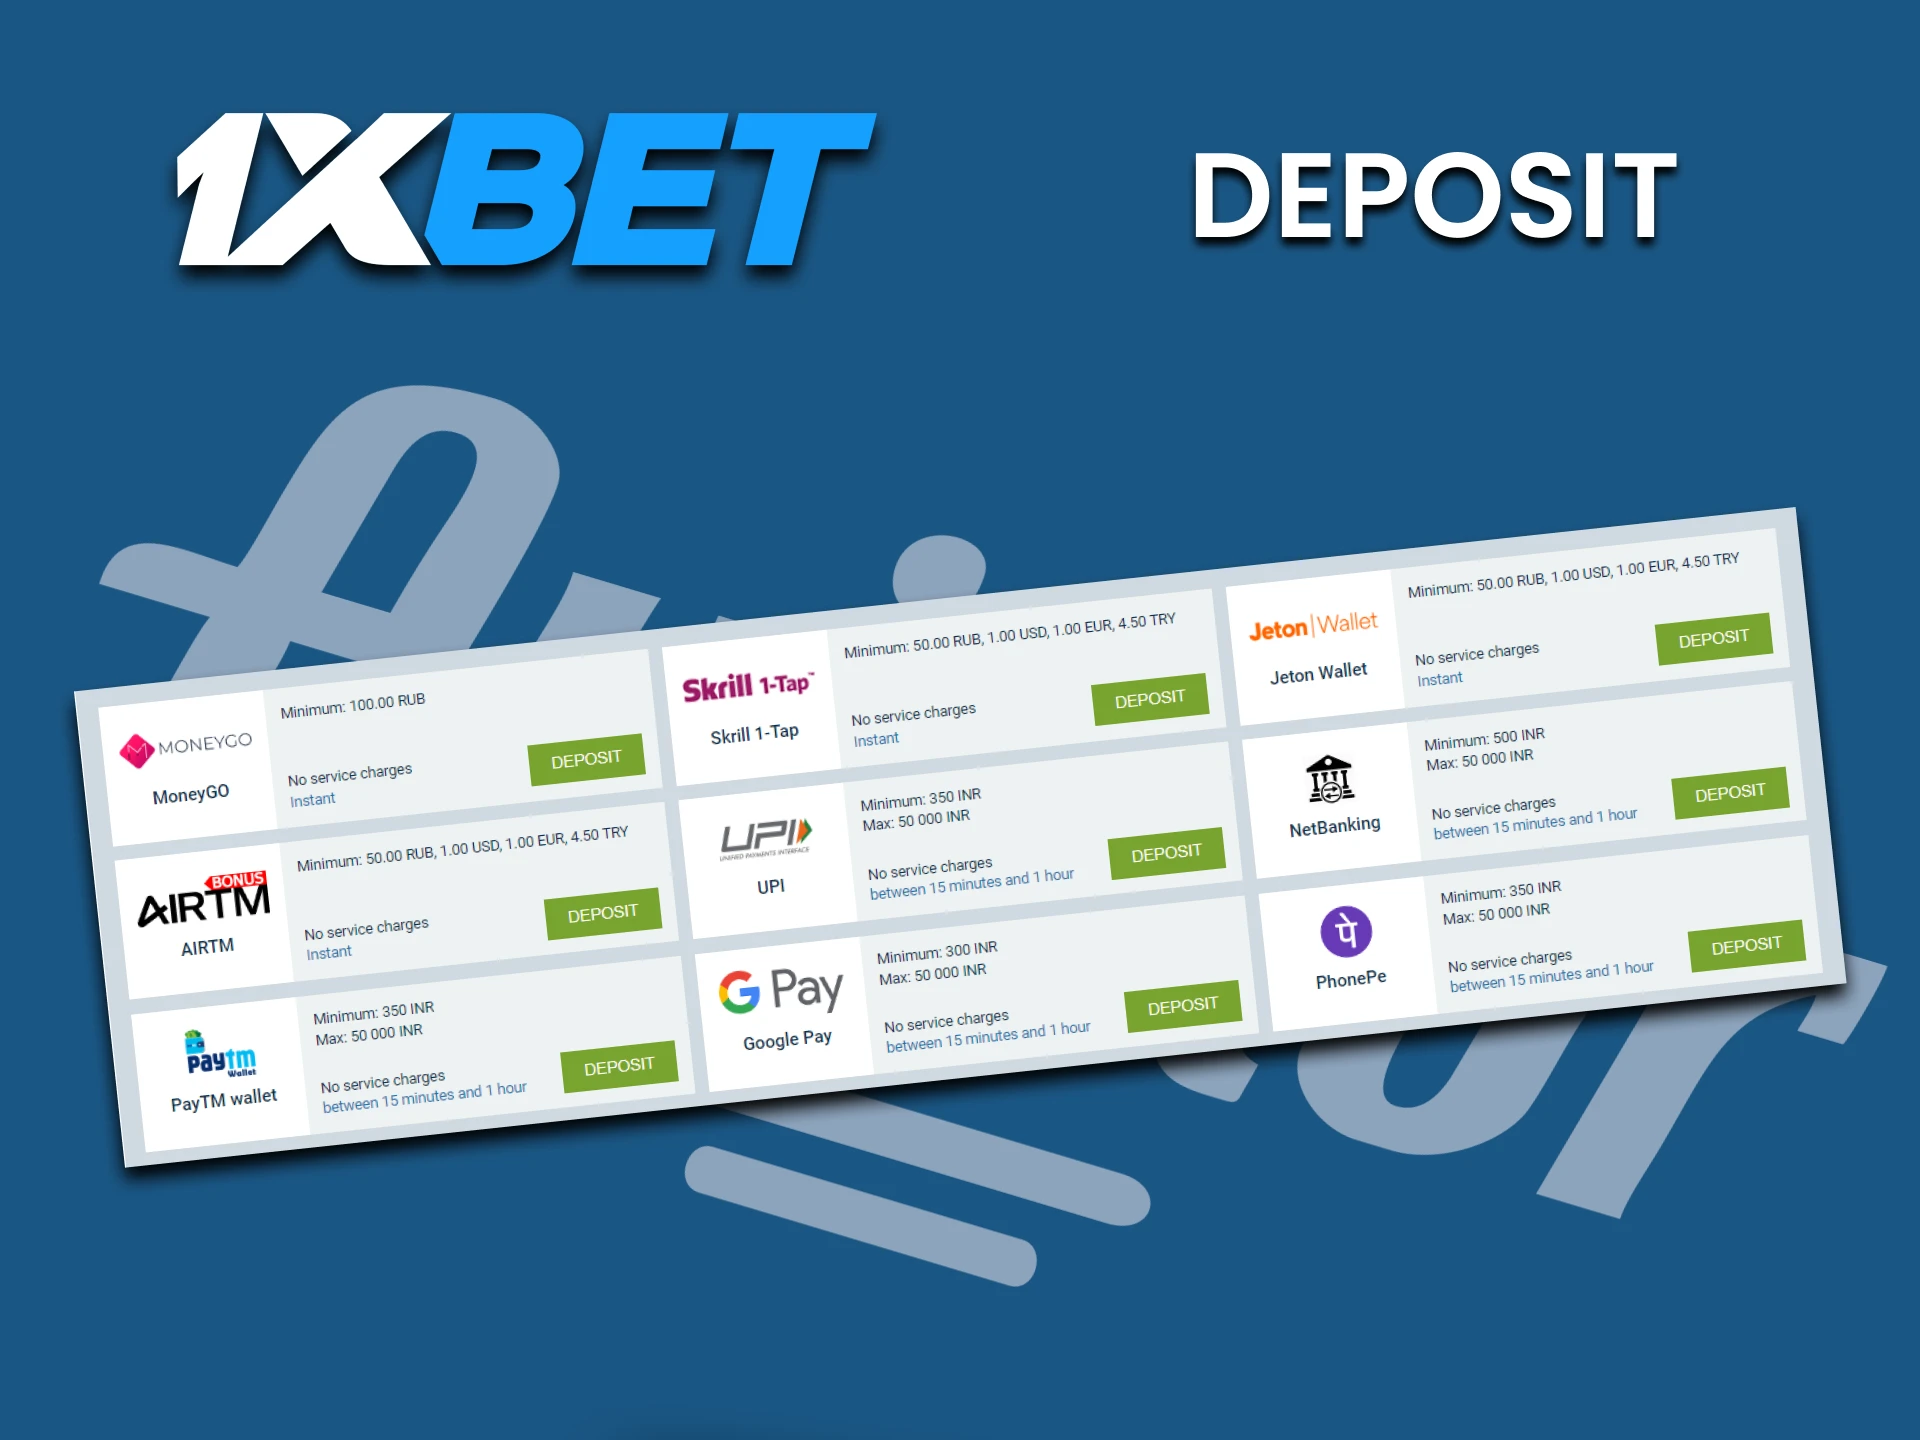 Choose your method of replenishing funds at 1xbet for Aviator.